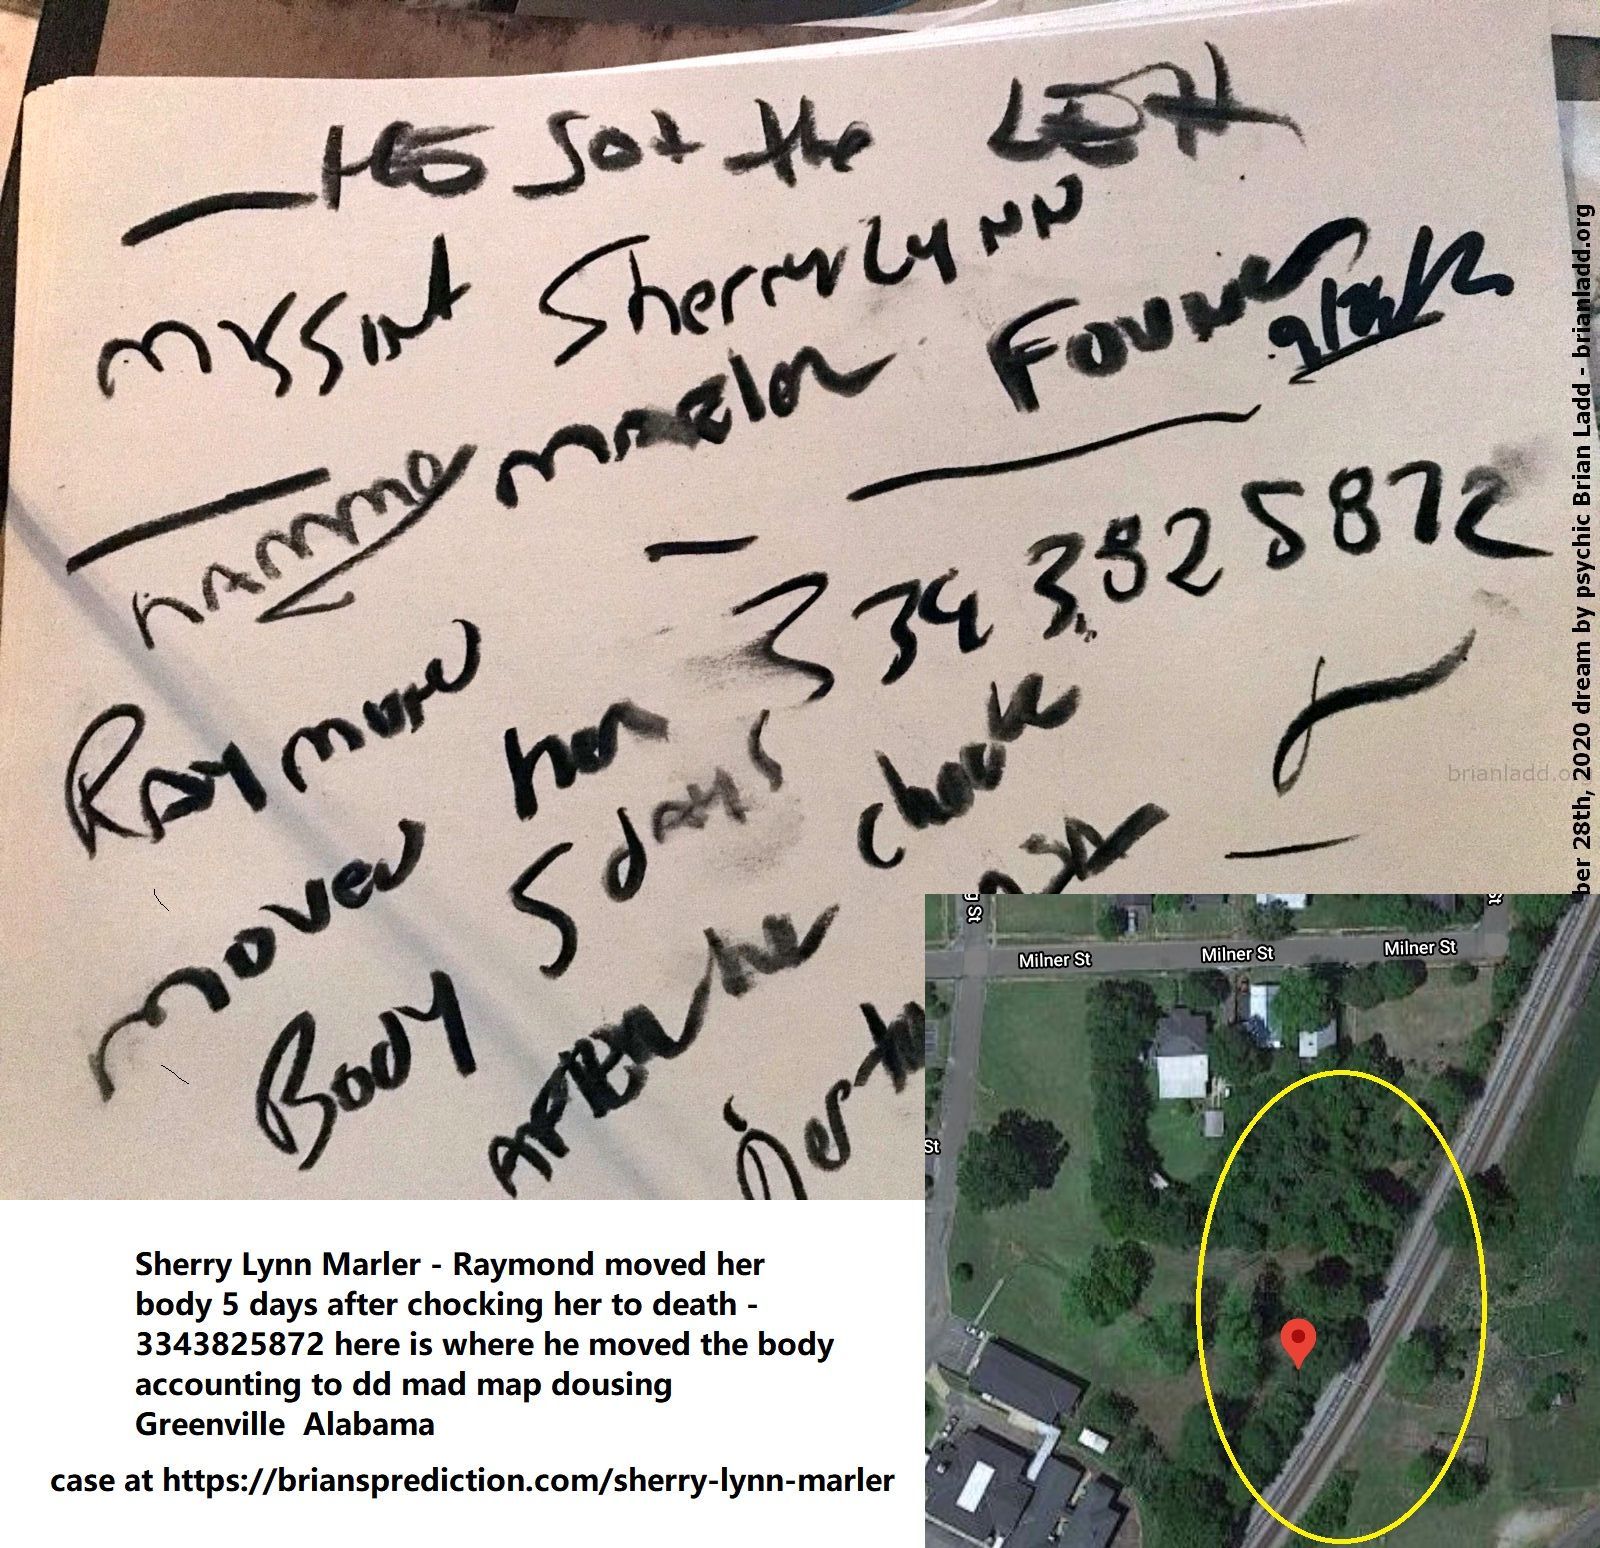 13714 28 September 2020 1 - Sherry Lynn Marler Found - Raymond Moved Her Body 5 Days After Chocking Her To Death - 33438...
Sherry Lynn Marler Found - Raymond Moved Her Body 5 Days After Chocking Her To Death - 3343825872 Here Is Where He Moved The Body Accounting To Dd Mad Map Dousing  Greenville  Alabama  Case At   https://briansprediction.com/Sherry-Lynn-Marle
